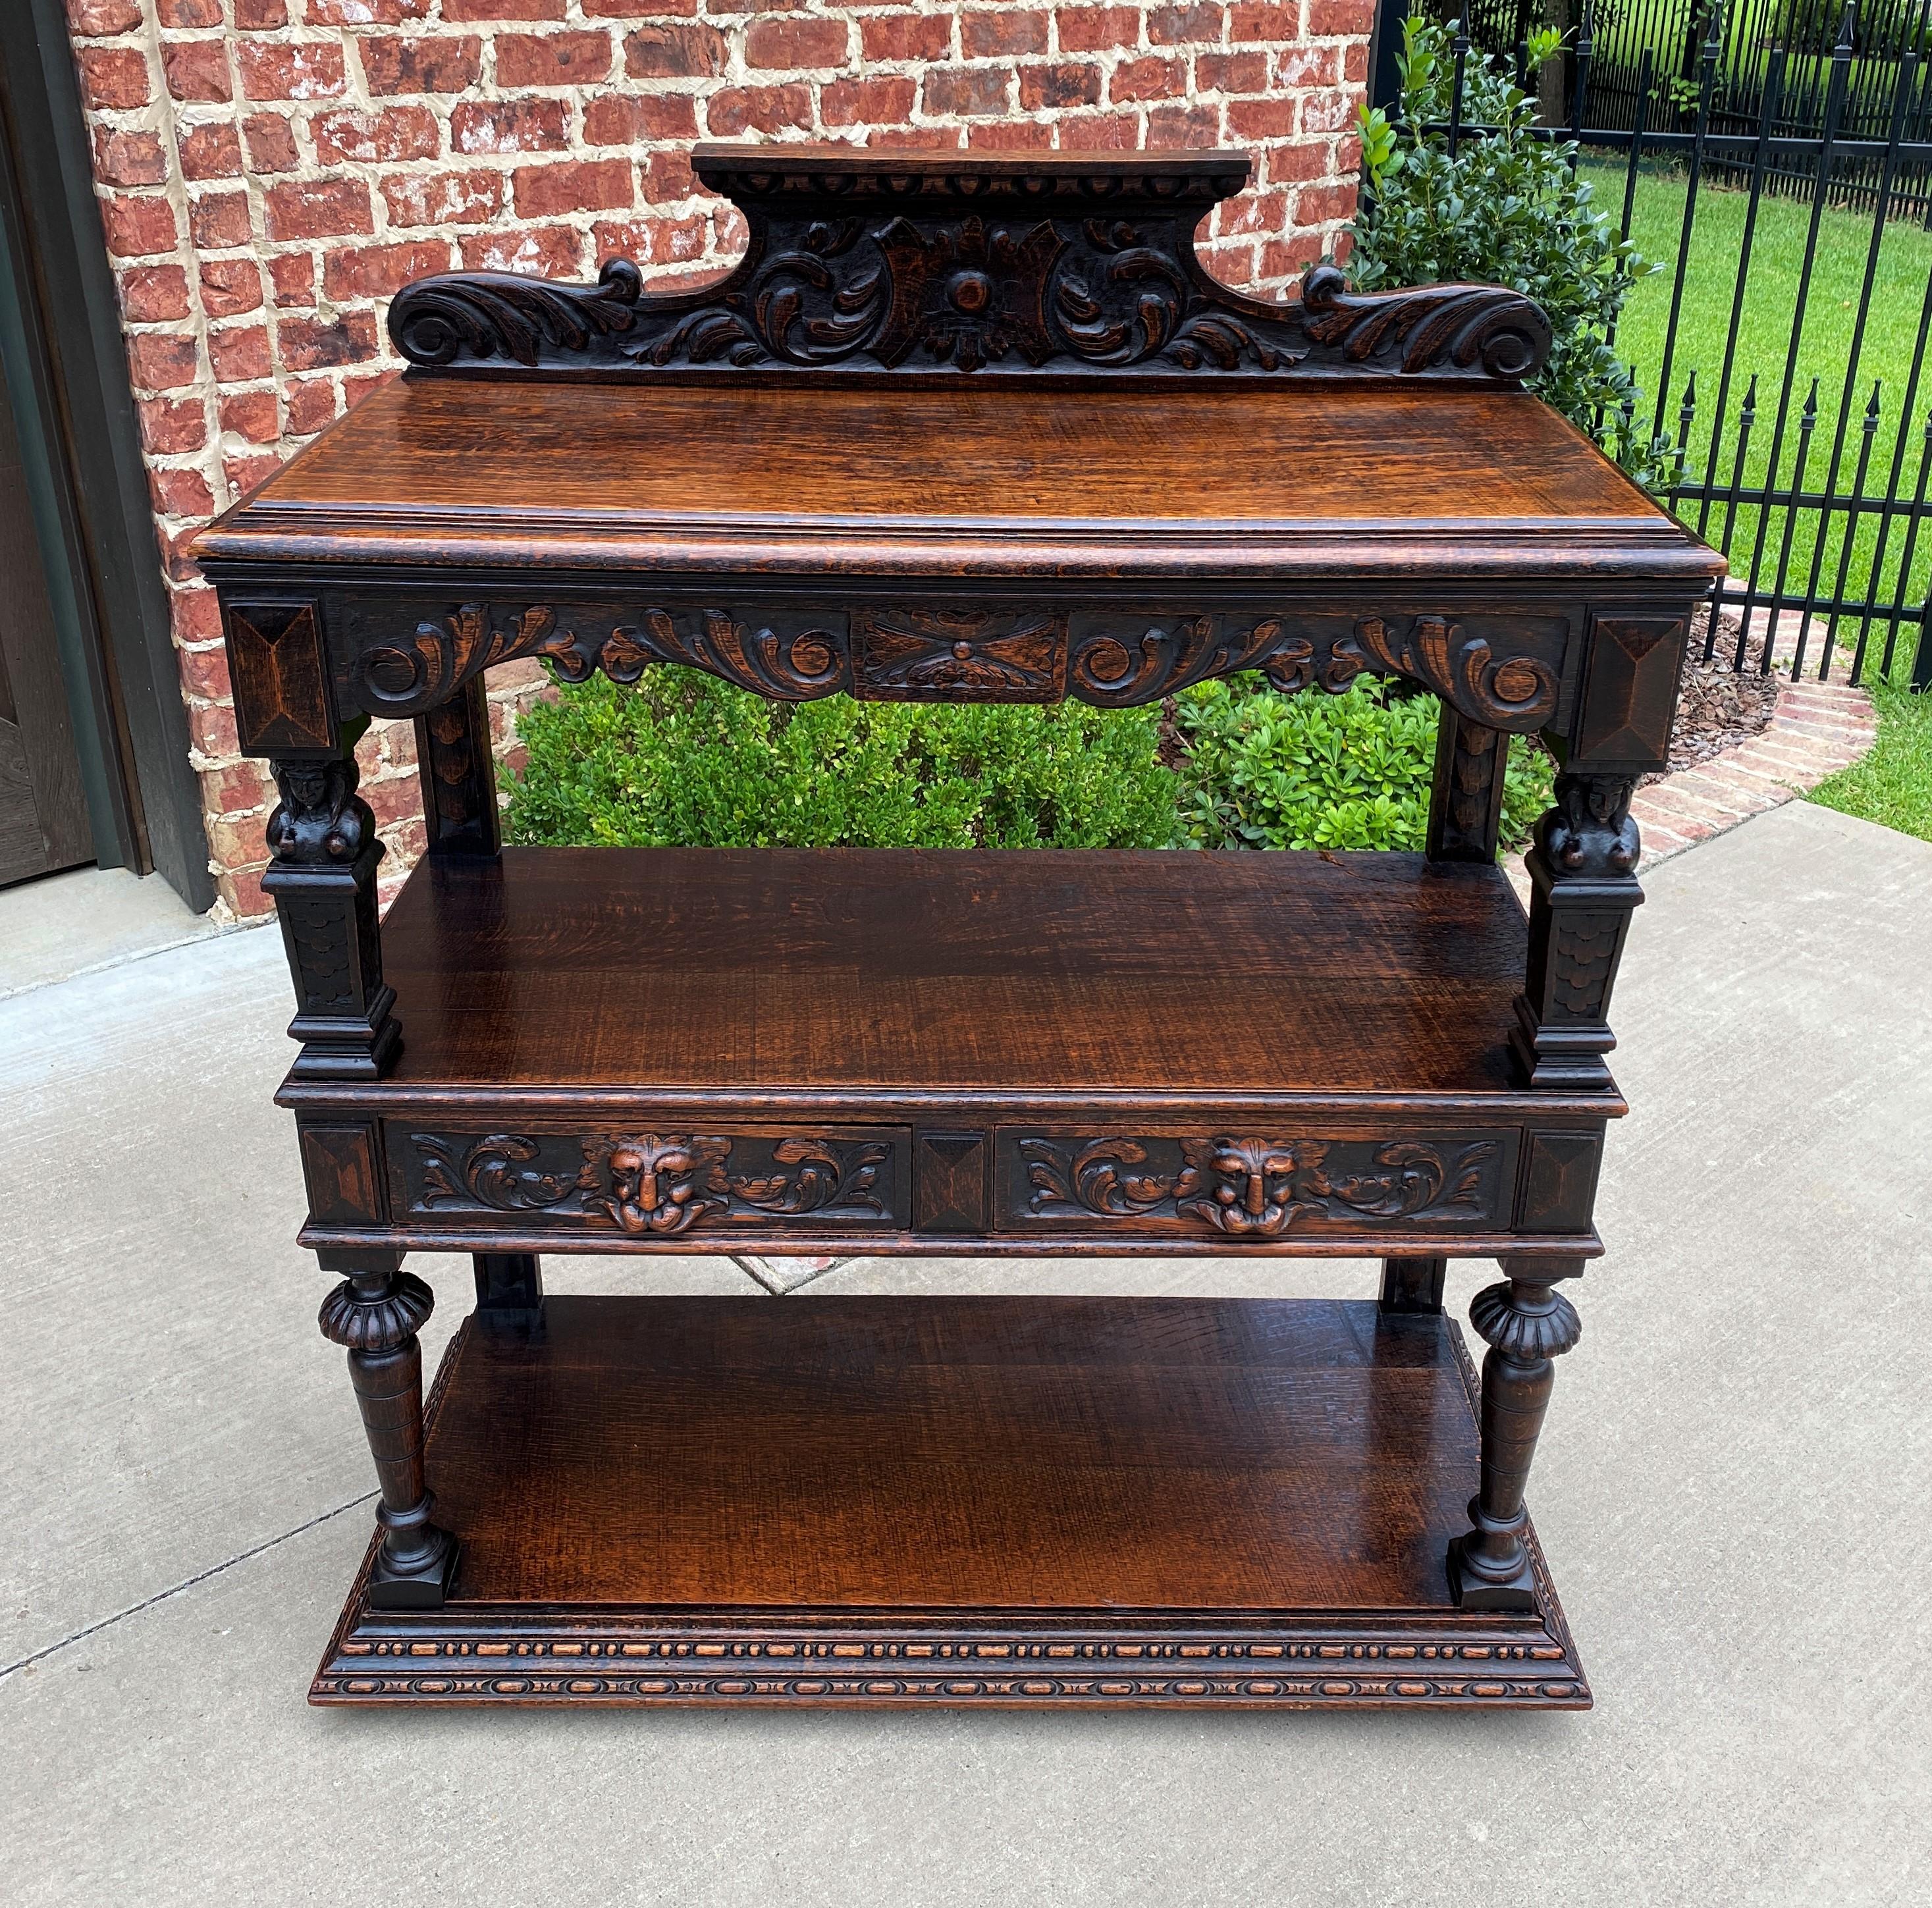 Charming and versatile antique English oak 3-tier Gothic revival server, sideboard or buffet with center drawers~~c. 1890s

Wonderful carved oak 3-tier sideboard or server ~~fill it with your favorite Majolica, Imari, Staffordshire, pottery,